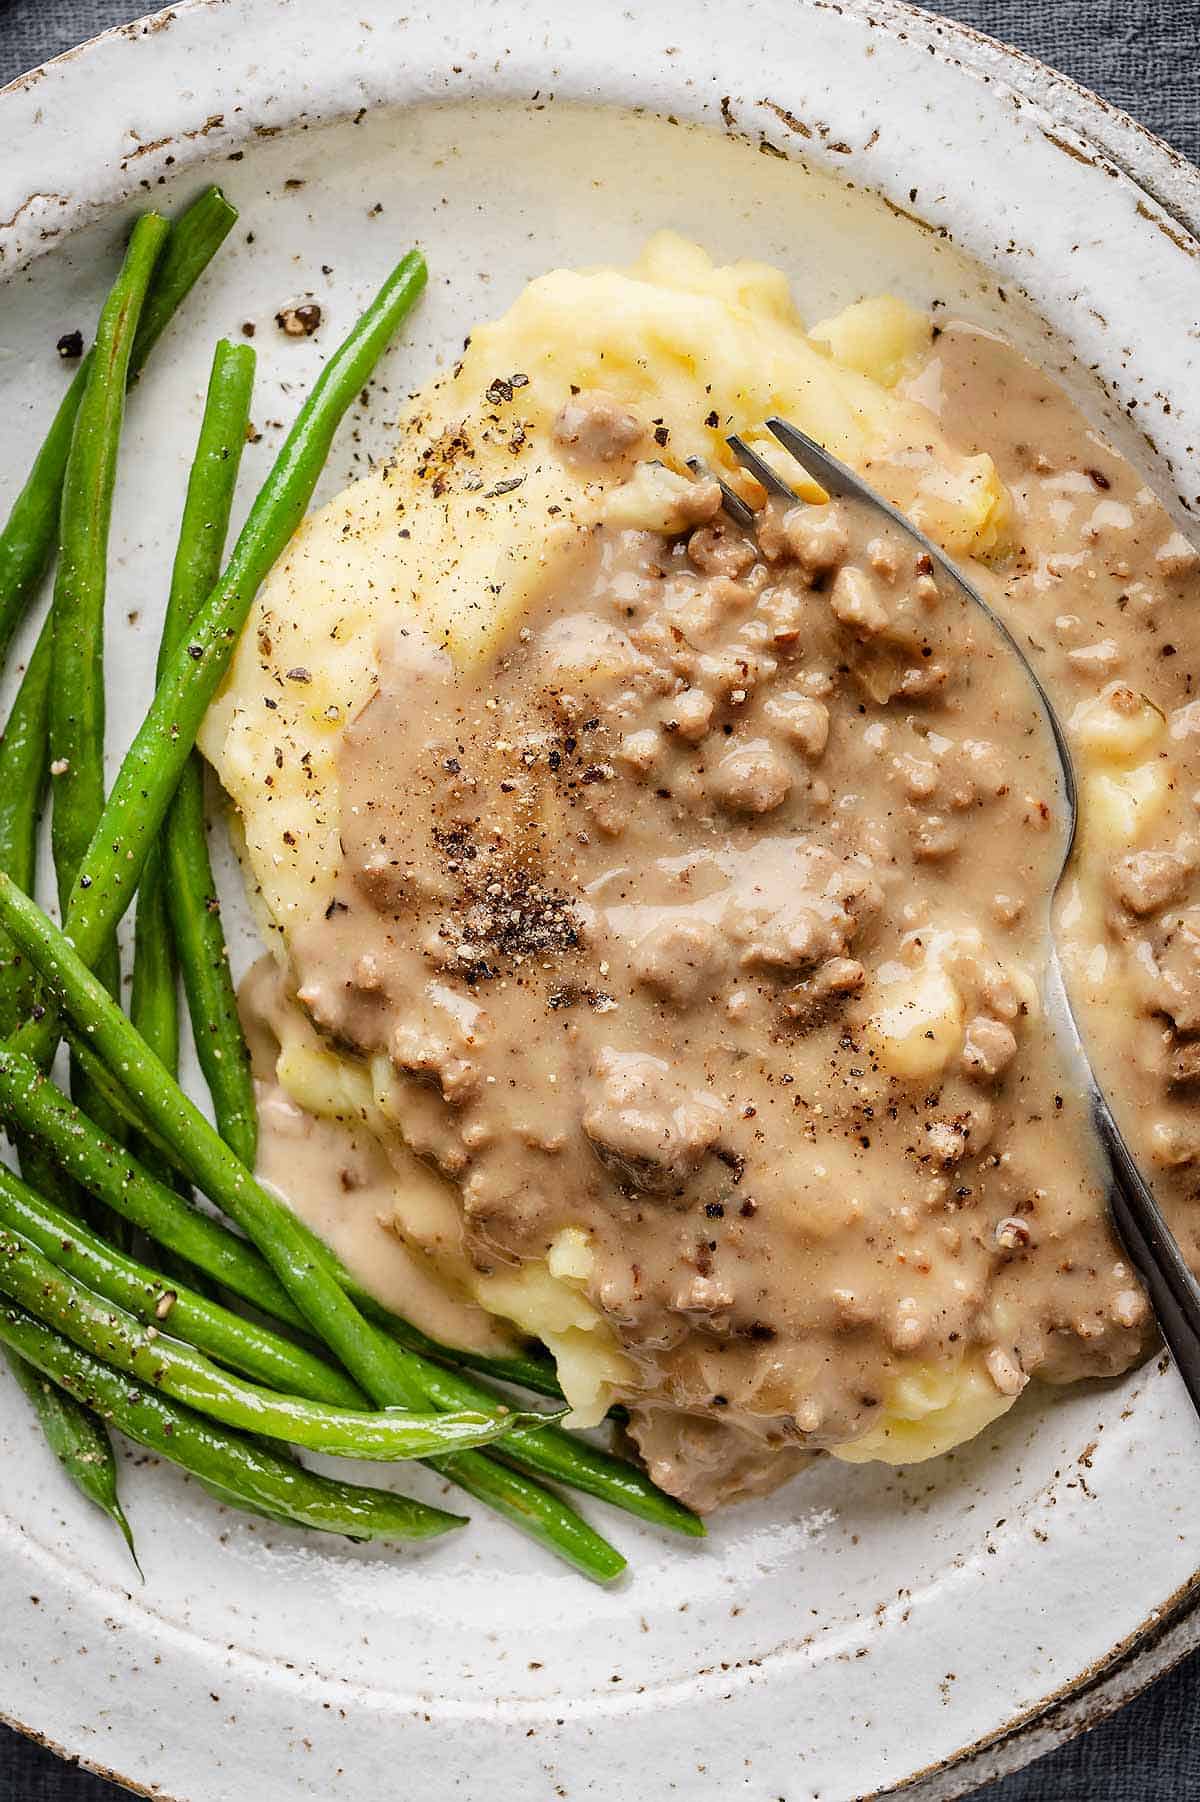 A pile of potatoes topped with Hamburger Gravy on a plate with green beans.